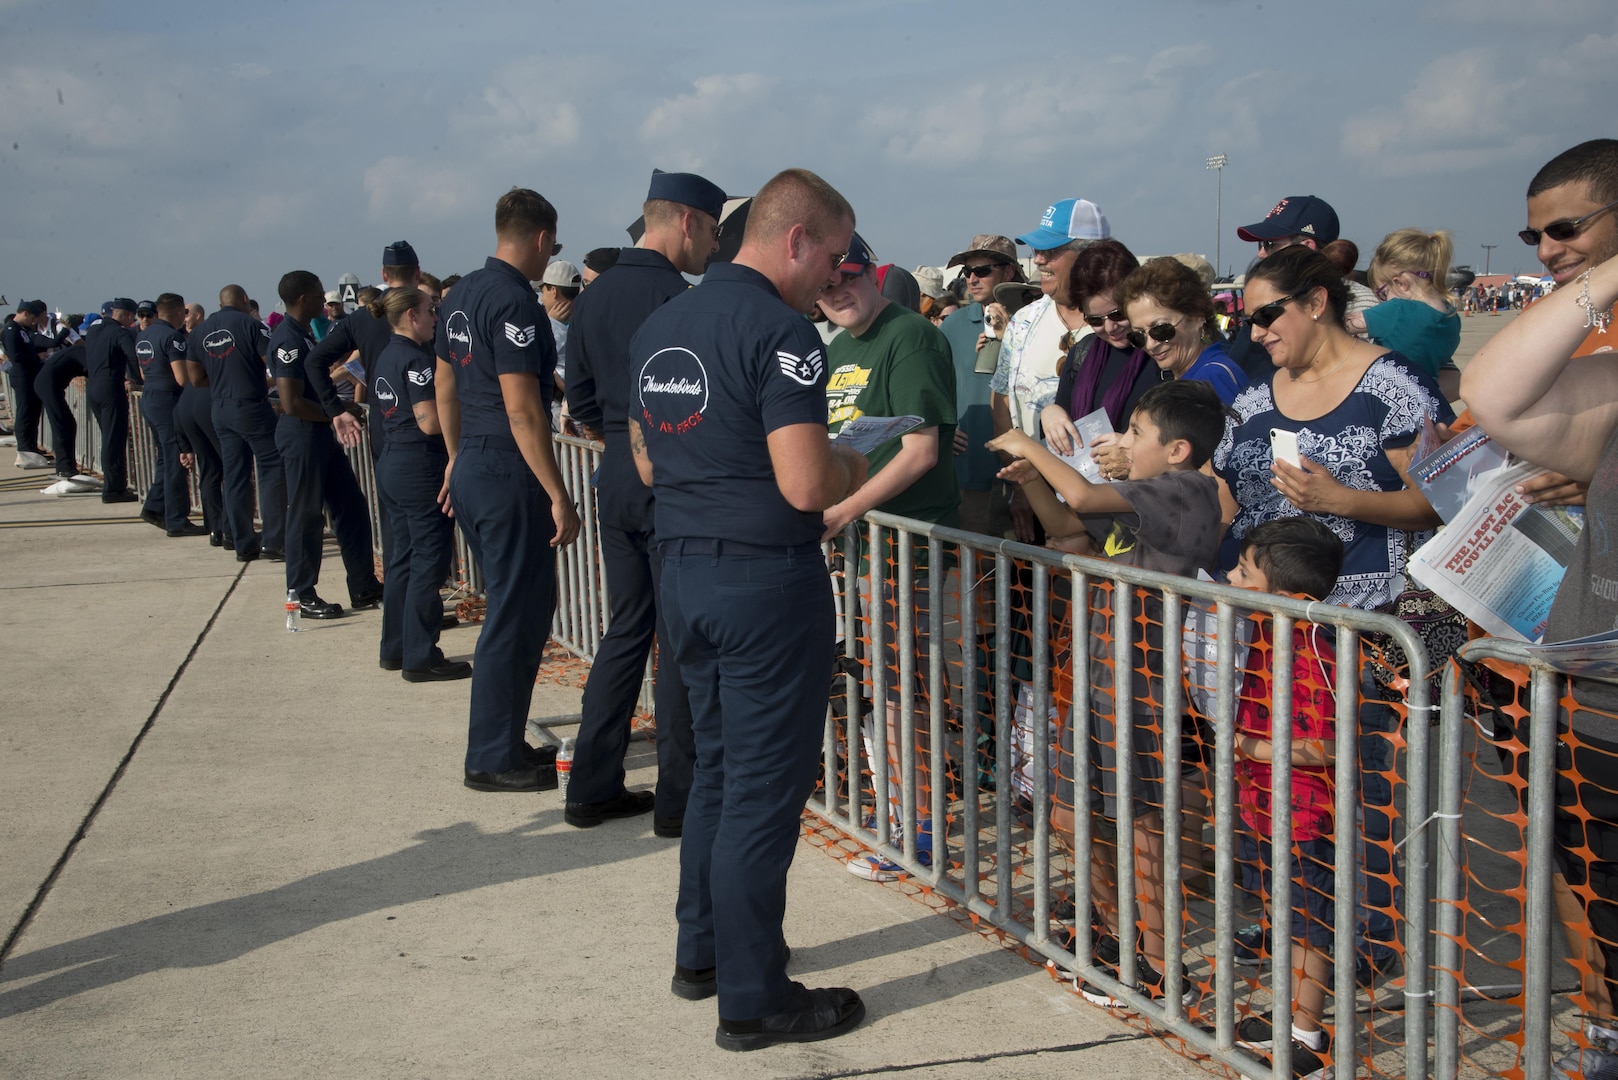 Members of the U.S. Air Force Aerial Demonstration Squadron “Thunderbirds” team sign autographs during the 2017 Joint Base San Antonio Air Show and Open House Nov. 4, at JBSA-Lackland, Kelly Field Annex.  Air shows allow the Air Force to display the capabilities of our aircraft to the American taxpayer through aerial demonstrations and static displays.  The air show gives attendees an opportunity to get up close and personal to see some of the equipment and aircraft used by the U.S. military today. (U.S. Air Force photo by Melissa Peterson/Released)